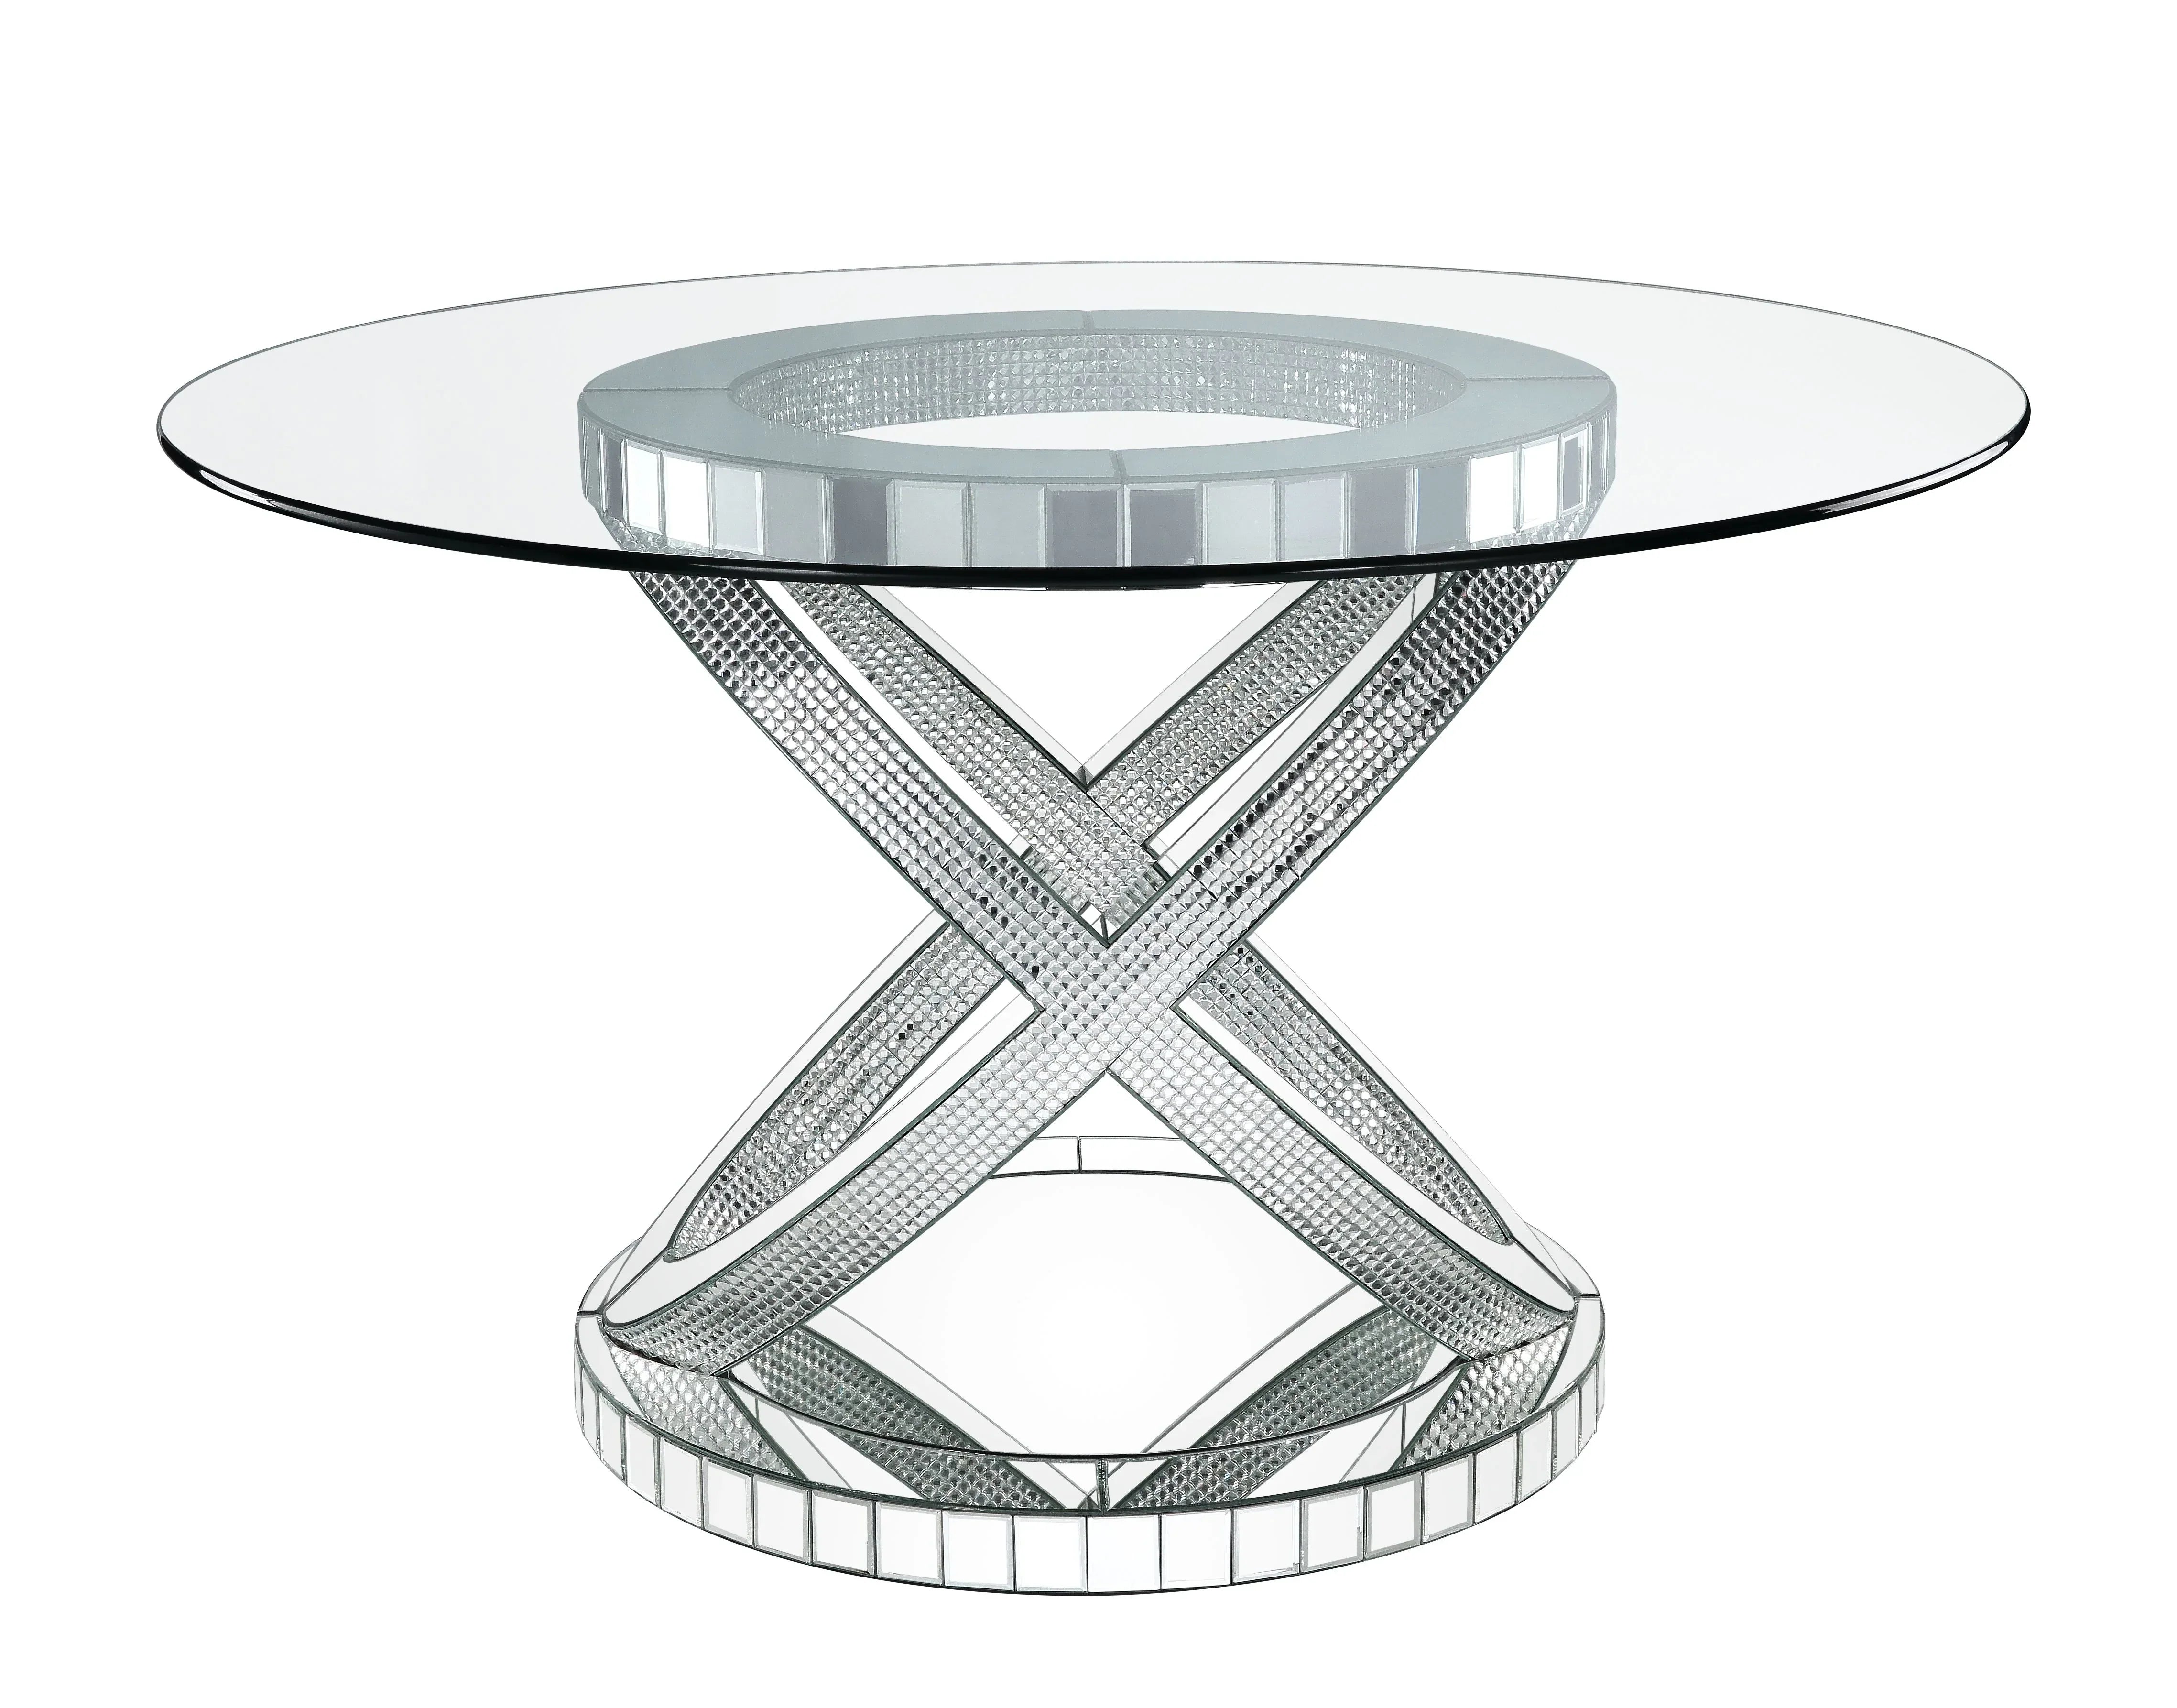 Ornat Clear Glass, Mirrored & Faux Diamonds Dining Table Model 72950 By ACME Furniture